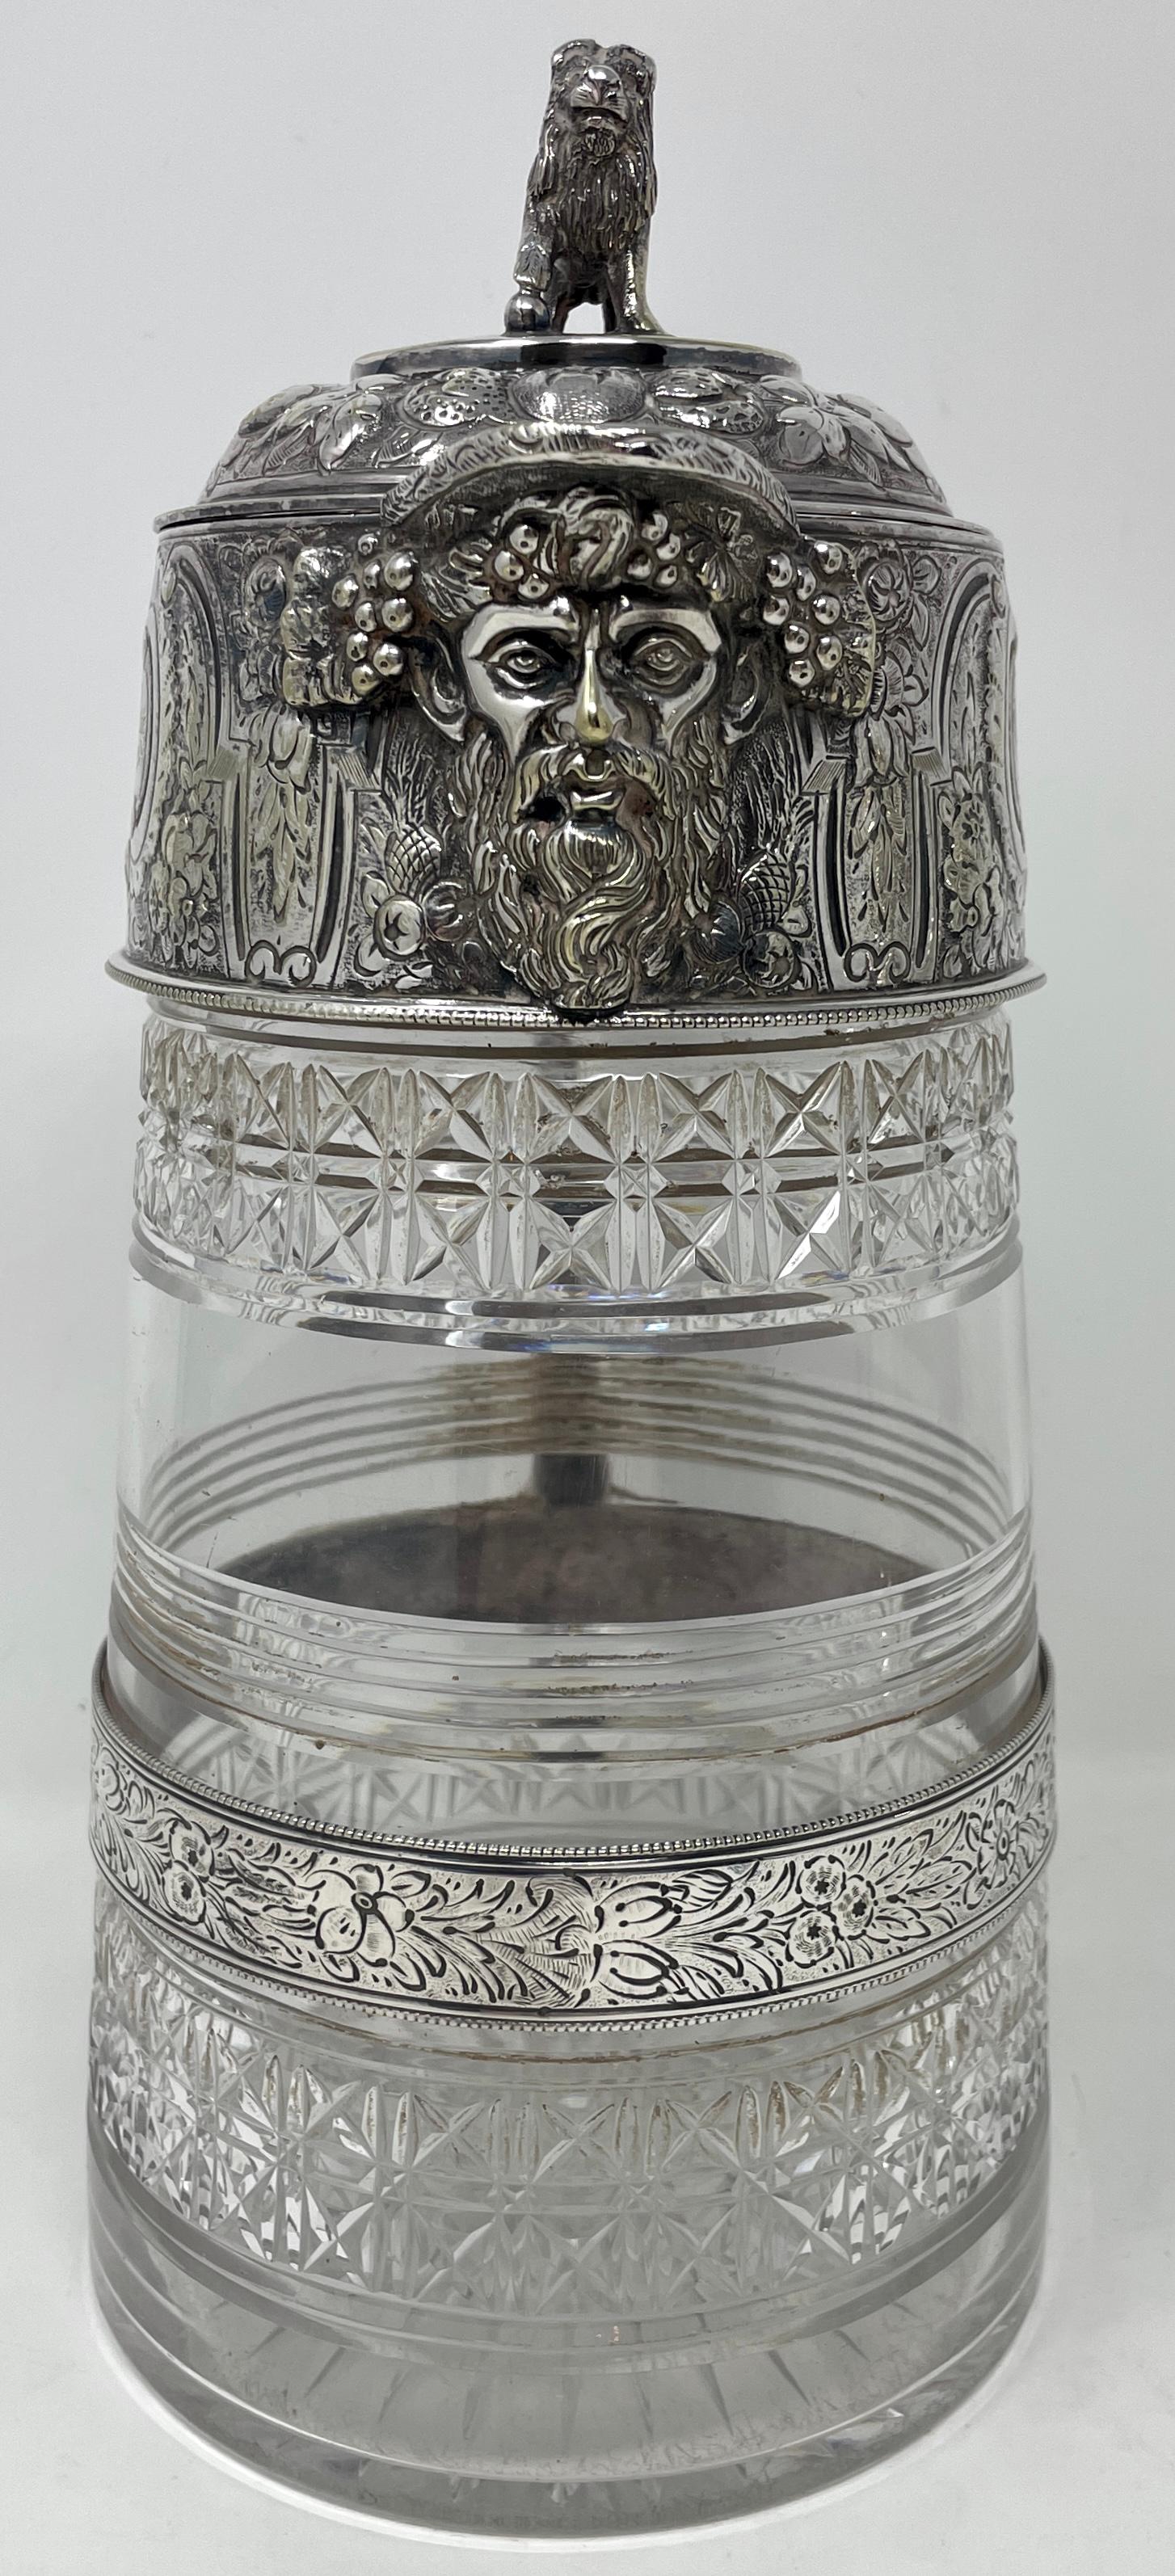 Antique English Sheffield silver and cut crystal claret or water jug with Lion and Crest at top, Presented April 1876.